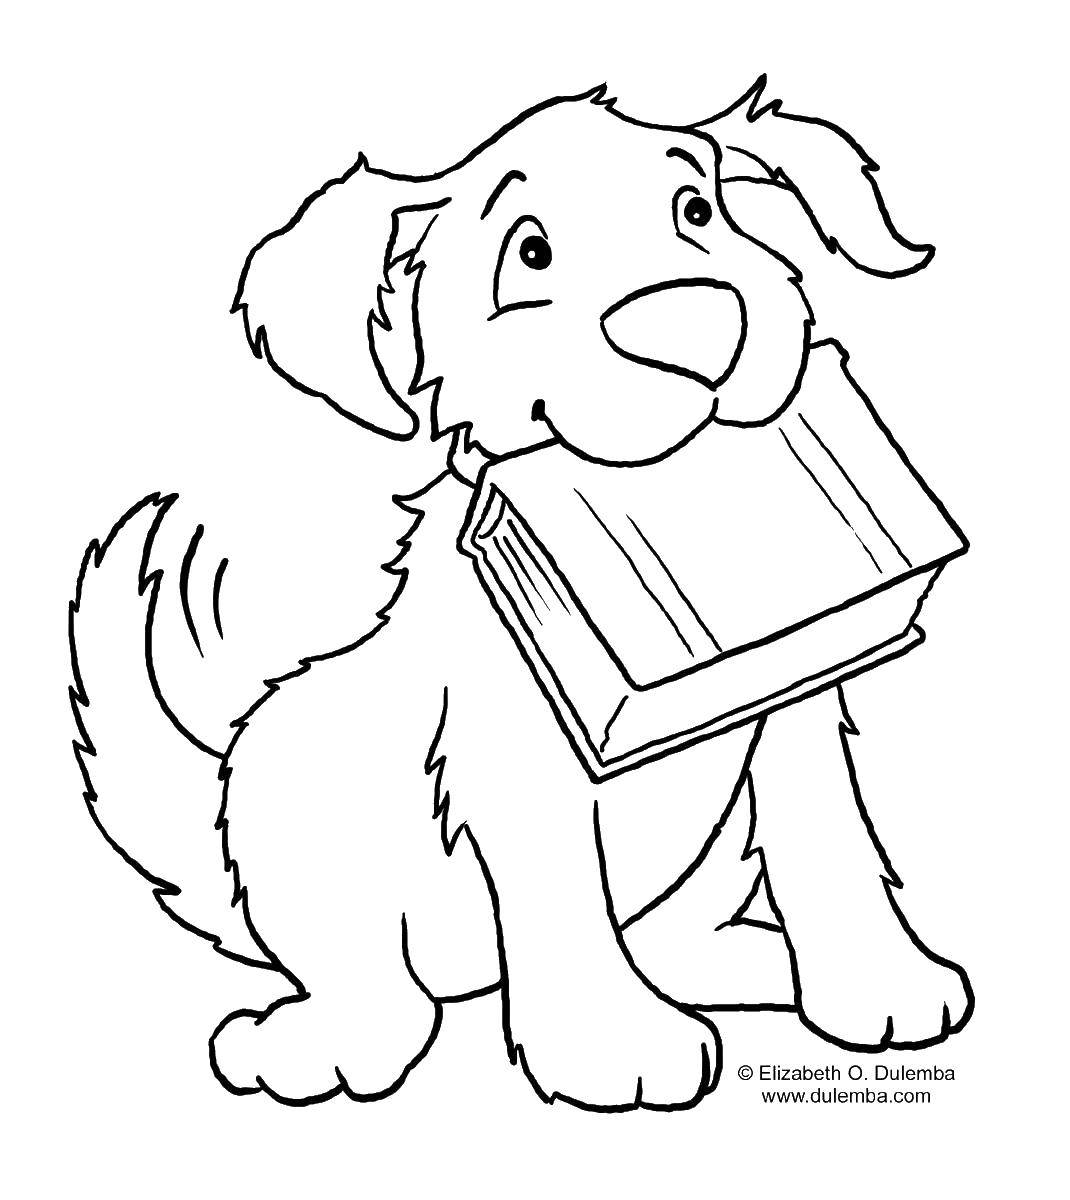 Coloring Dog with a book. Category Pets allowed. Tags:  animals, book, dog, doggy.